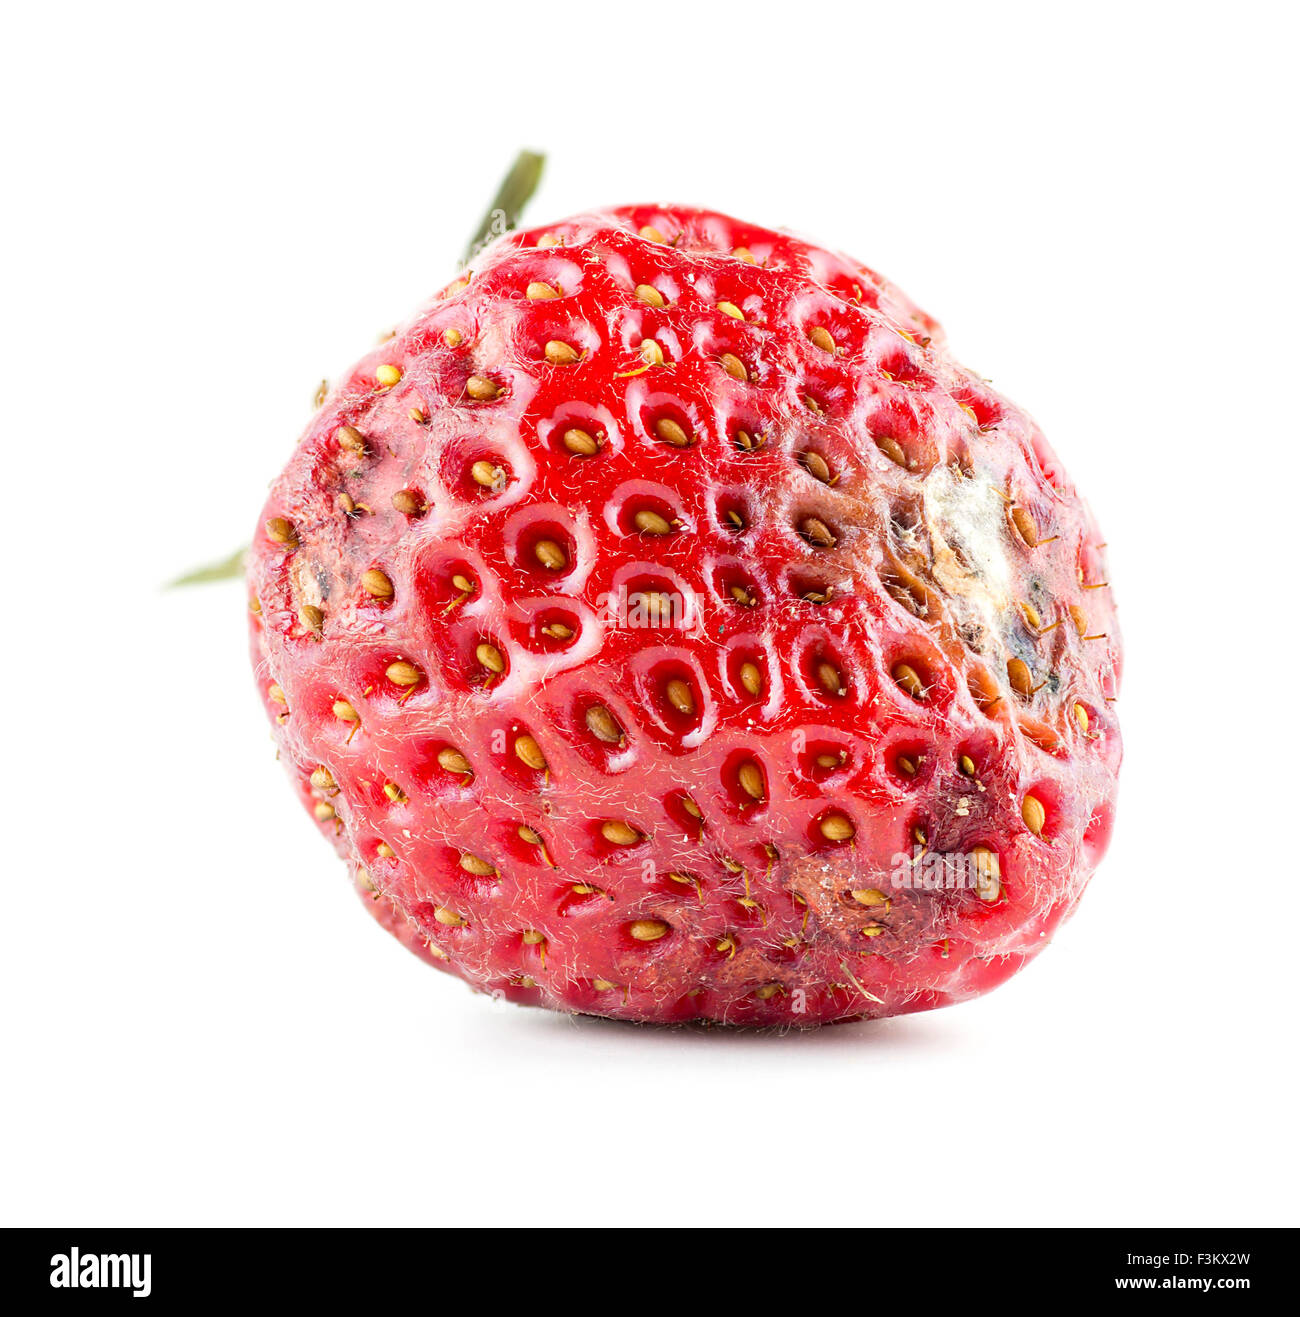 4,732 Strawberry Mold Images, Stock Photos, 3D objects, & Vectors